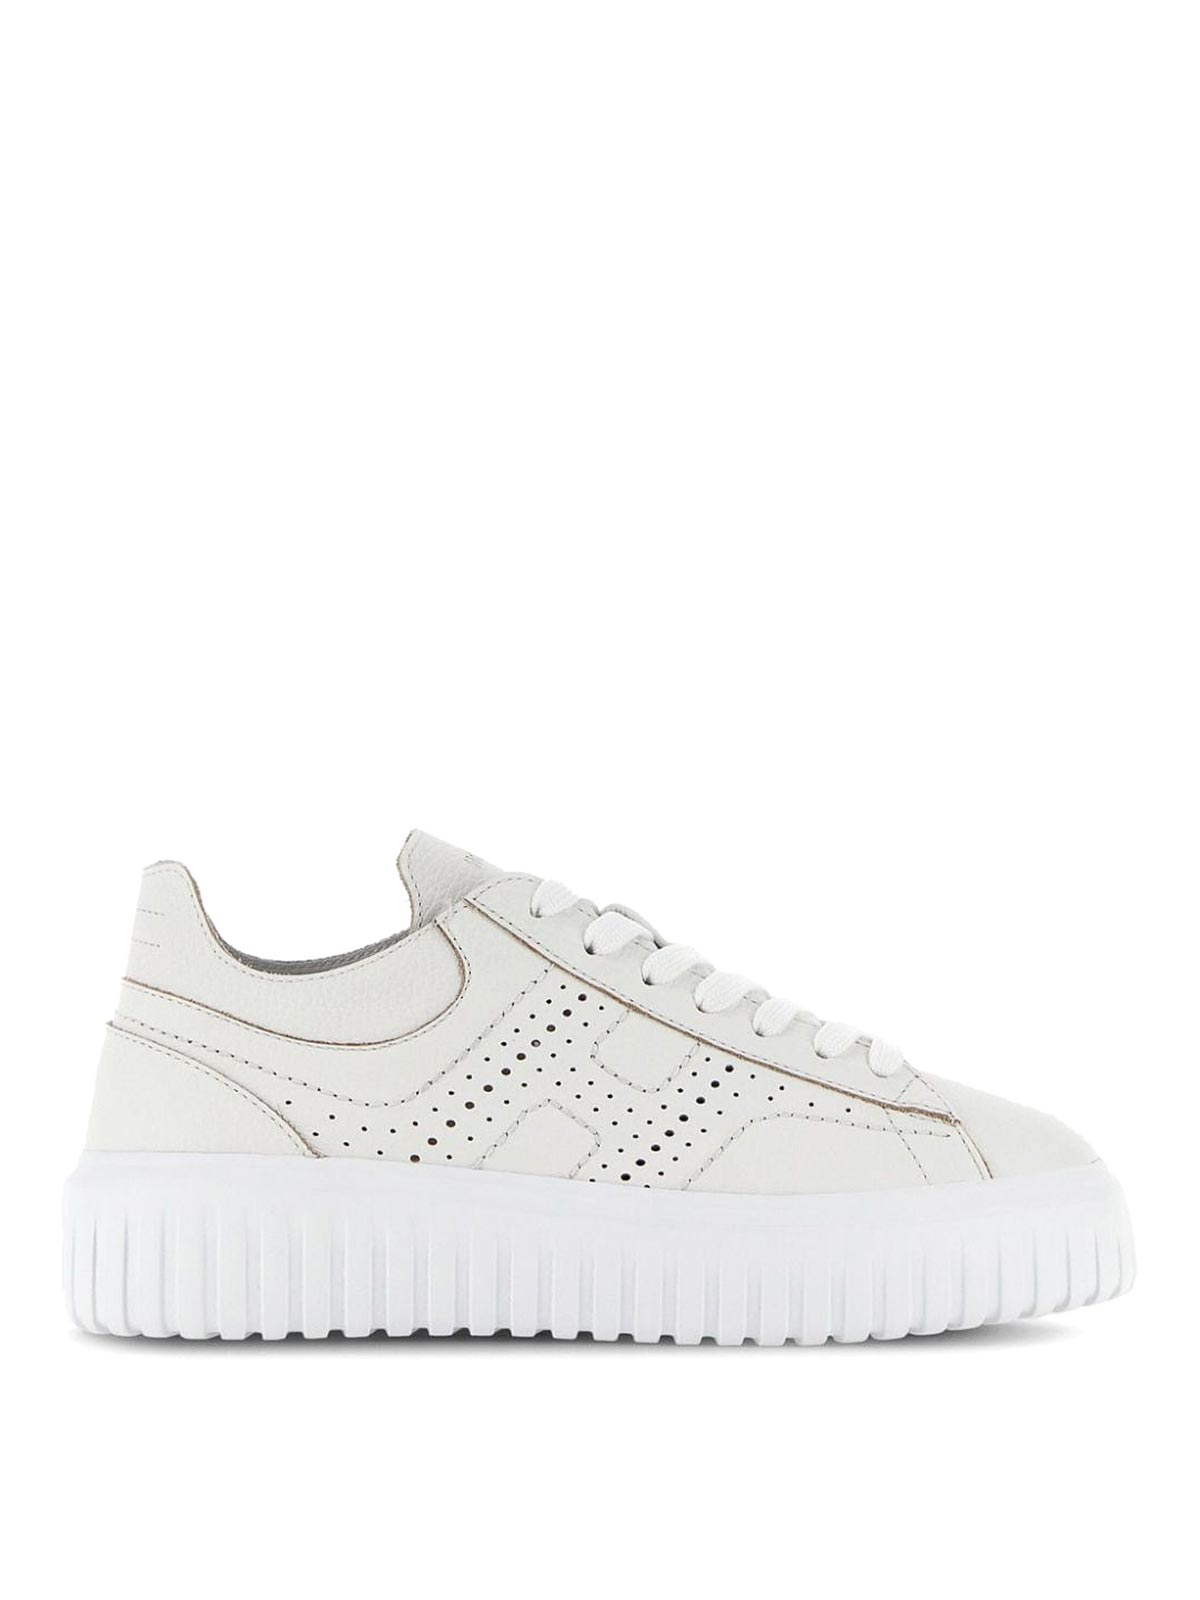 Hogan H-stripes Leather Sneakers In Blanco